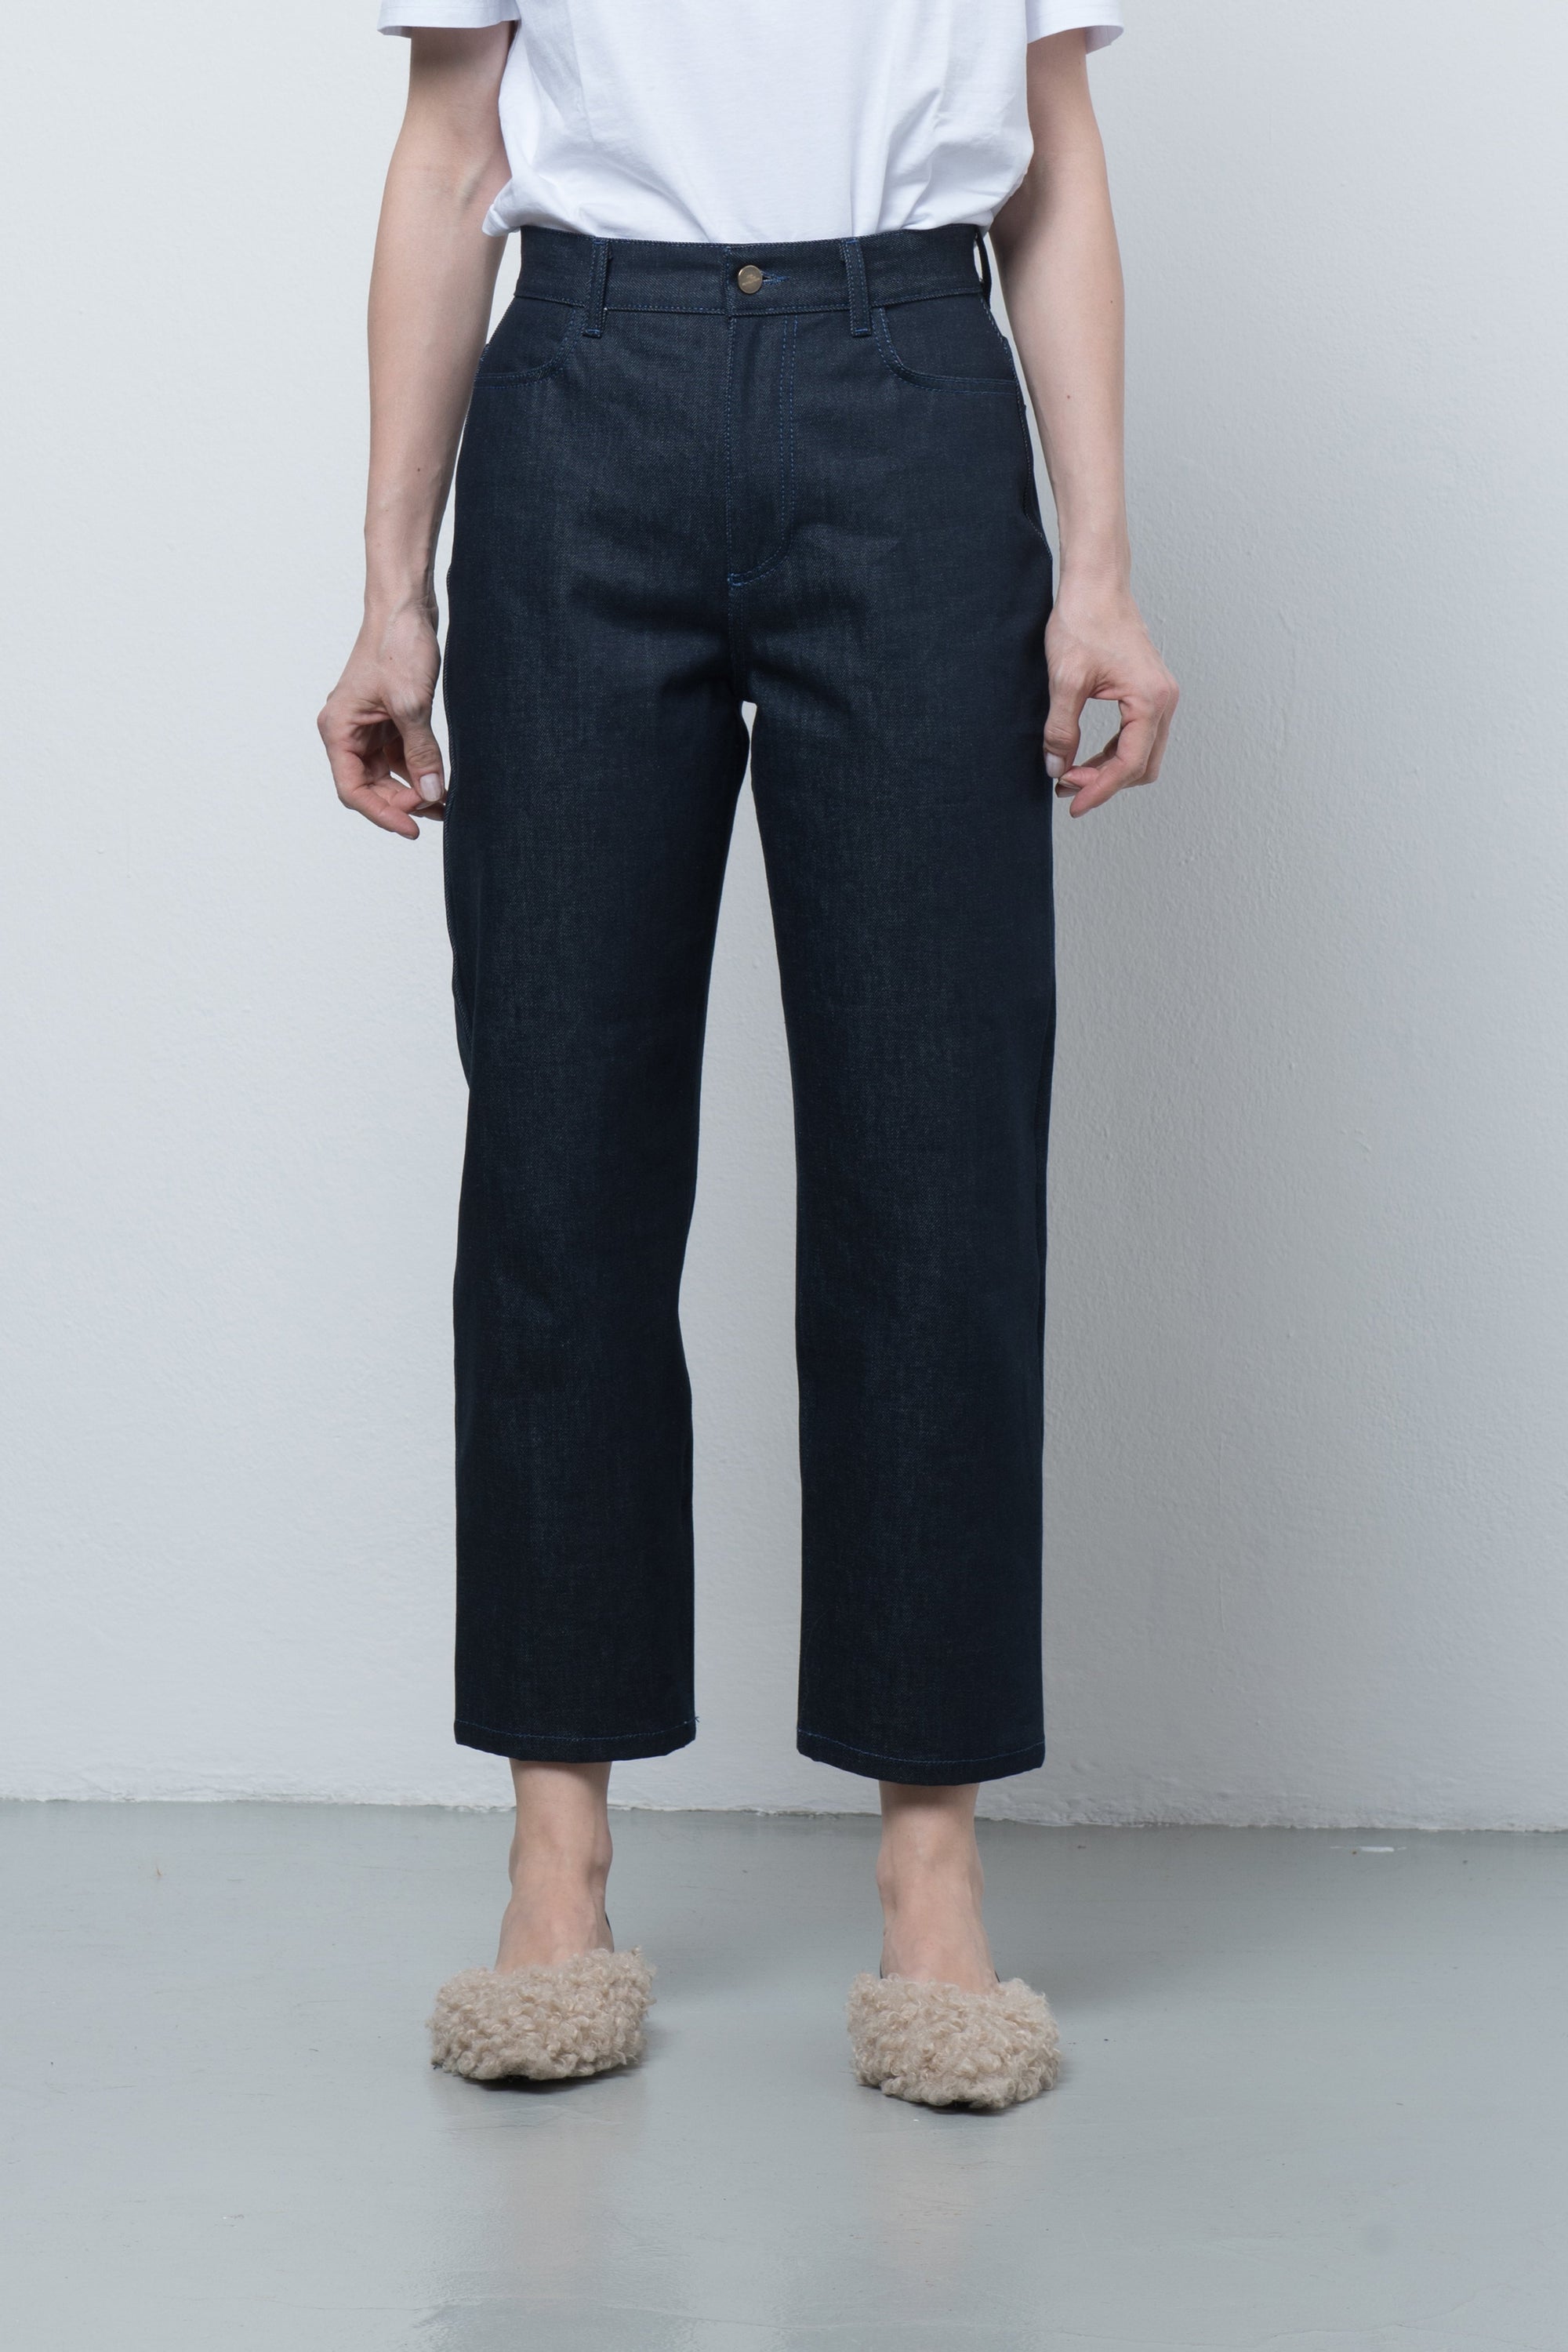 FW 22/23 Mississippi RAW unisex loose jean - upcycled fabric